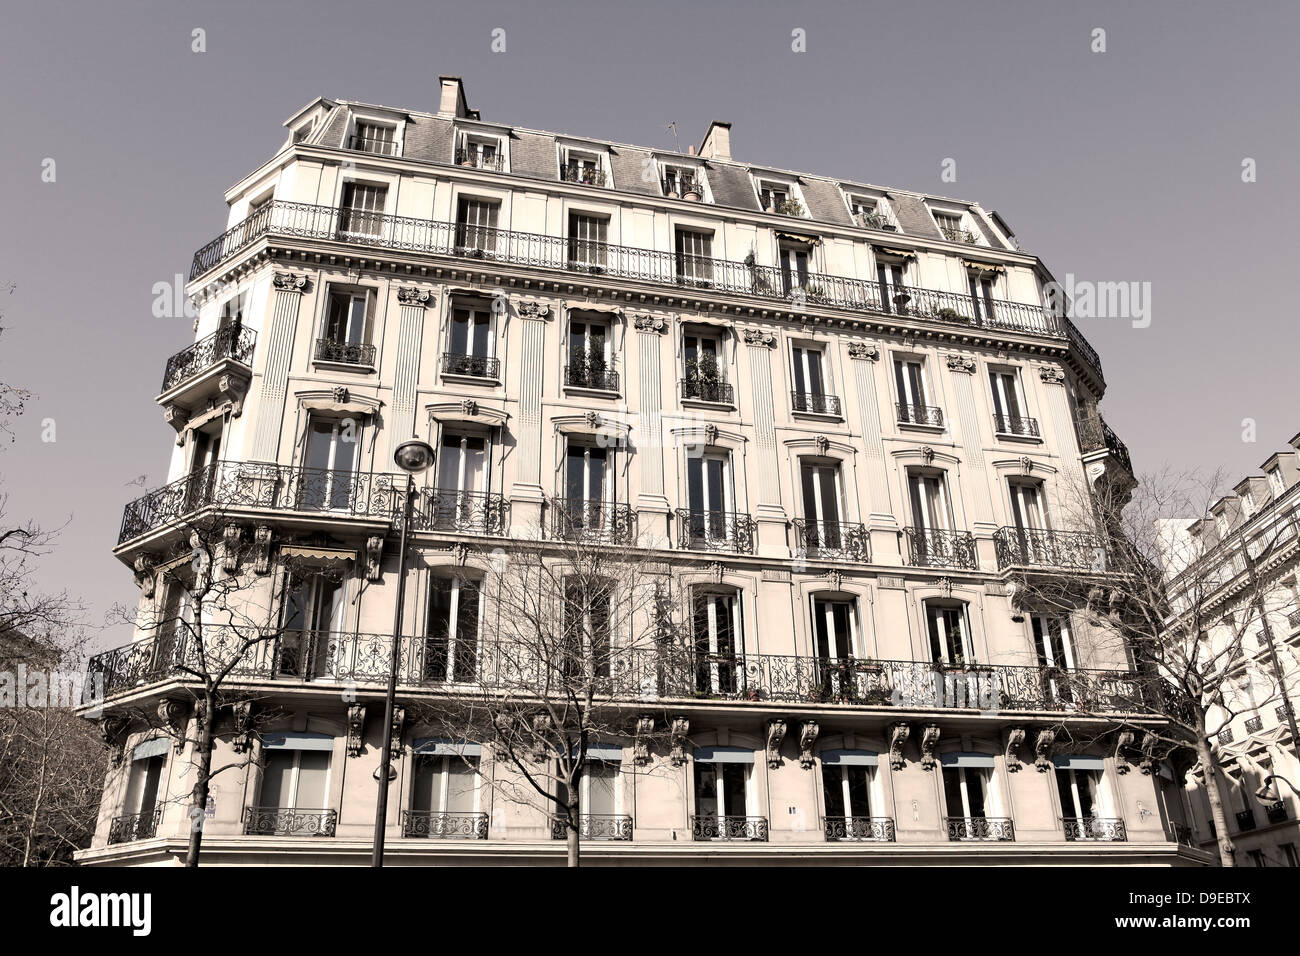 Paris Apartment block, in the typical neoclassical style (sepia image) Stock Photo